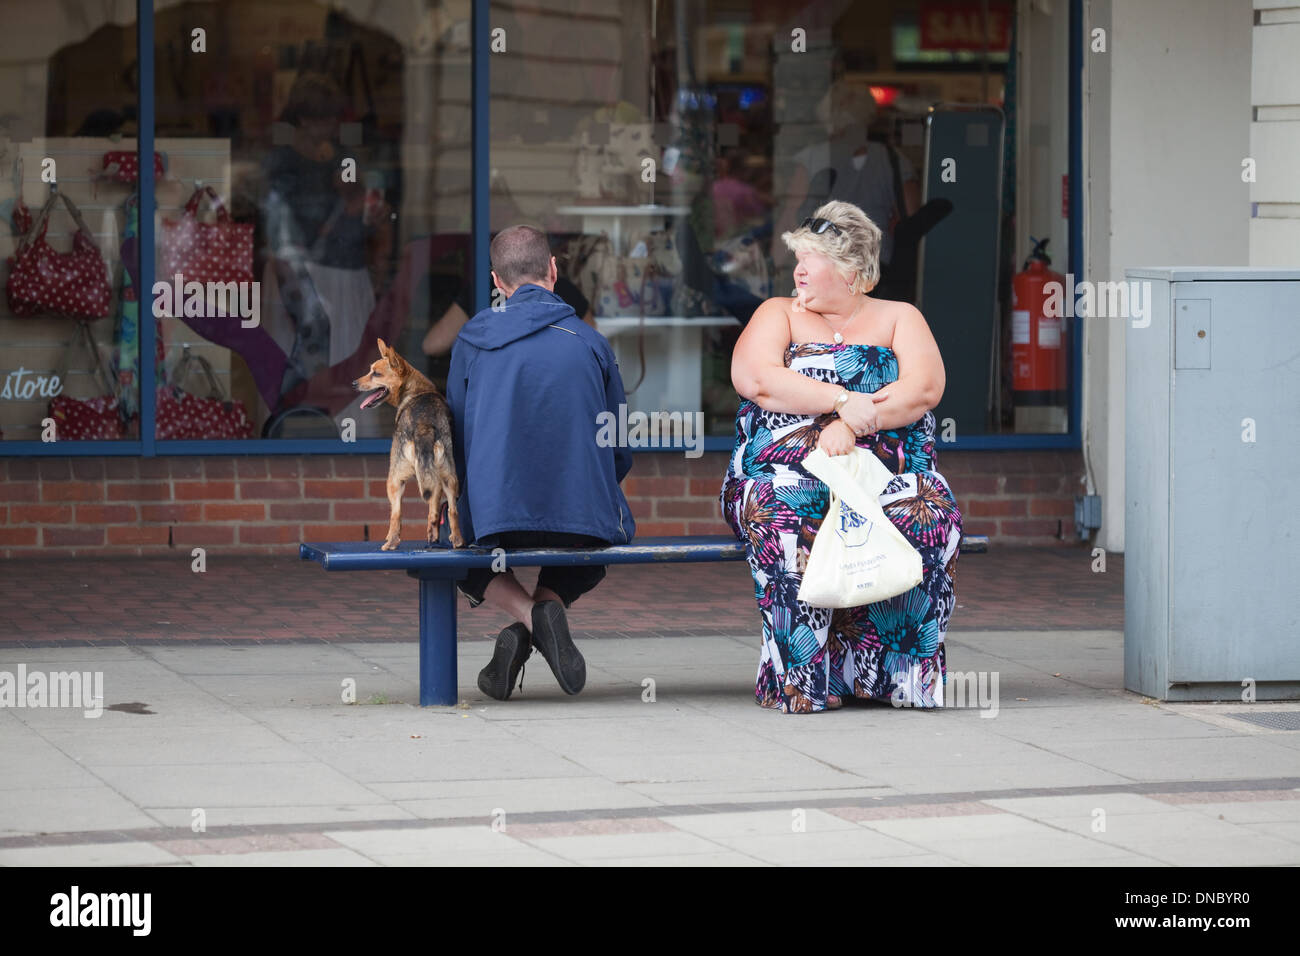 Obesity, isolation, outcasts, loneliness. Dog. Urban seat bench, shopping street in UK. Stock Photo